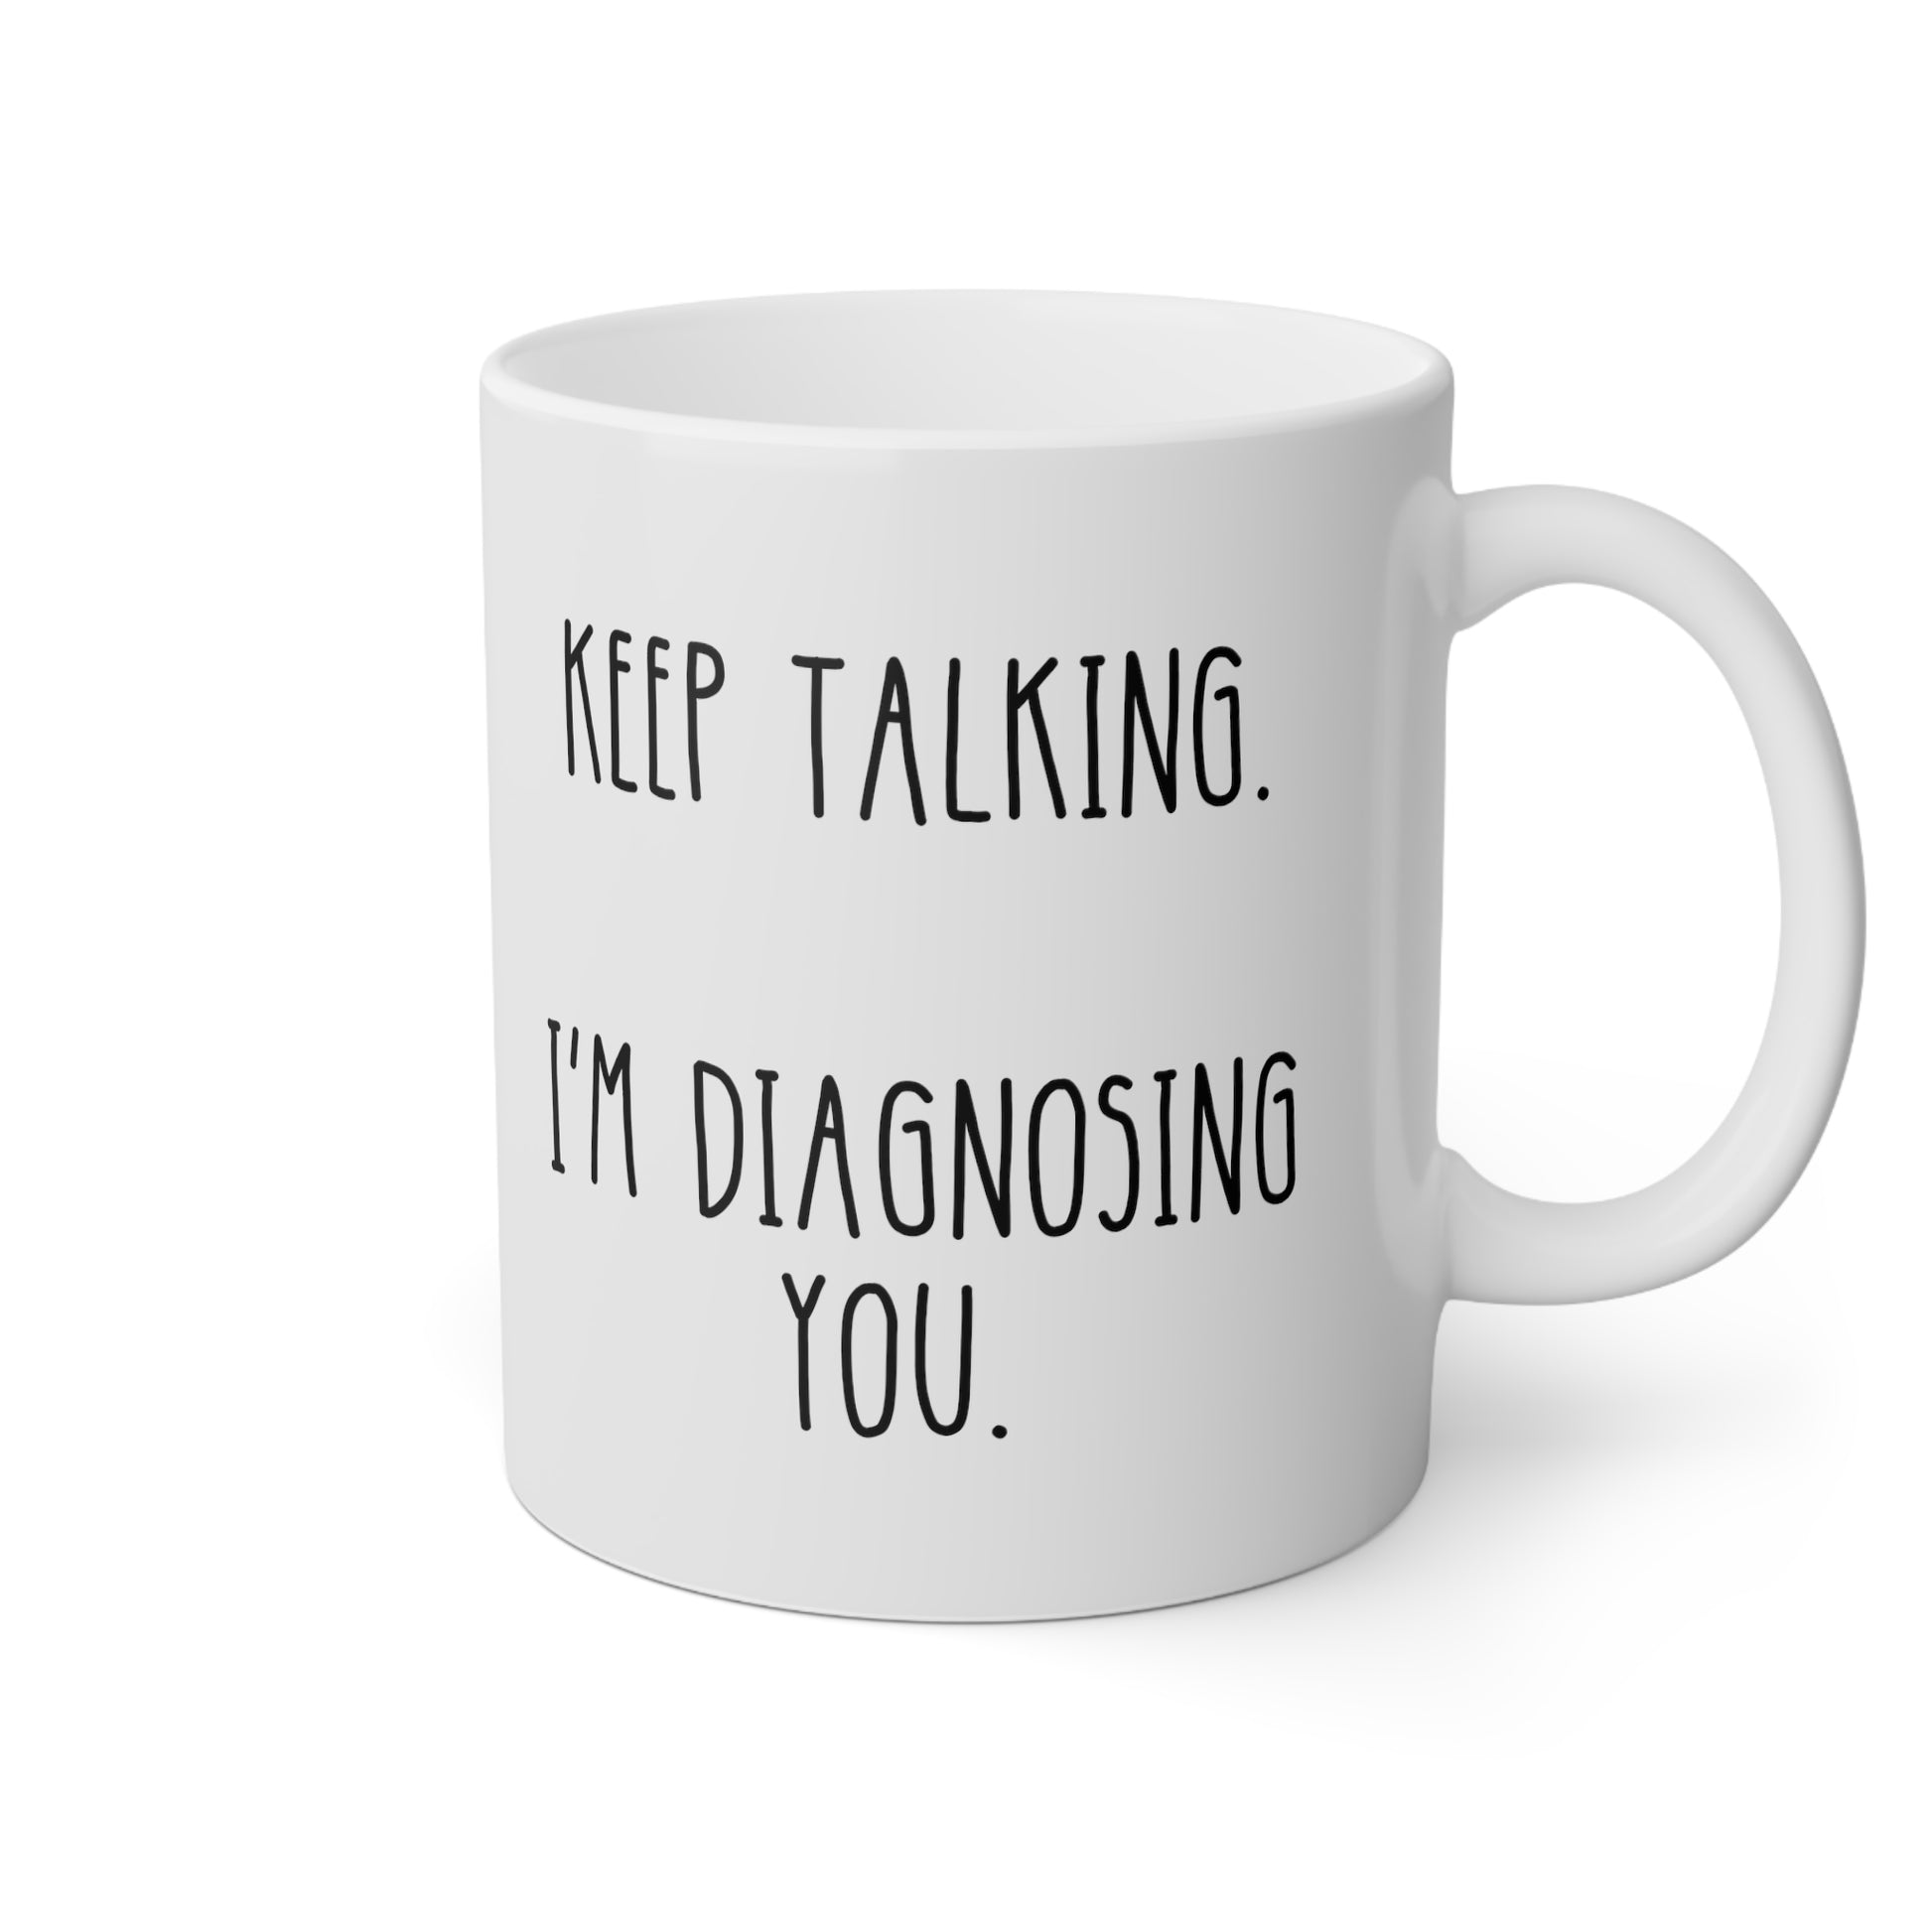 Keep Talking Im Diagnosing You 11oz white Funny large Coffee Mug Psychology Gifts for Psychologist Psychiatrist Therapist Counselor waveywares wavey wares wavywares wavy wares